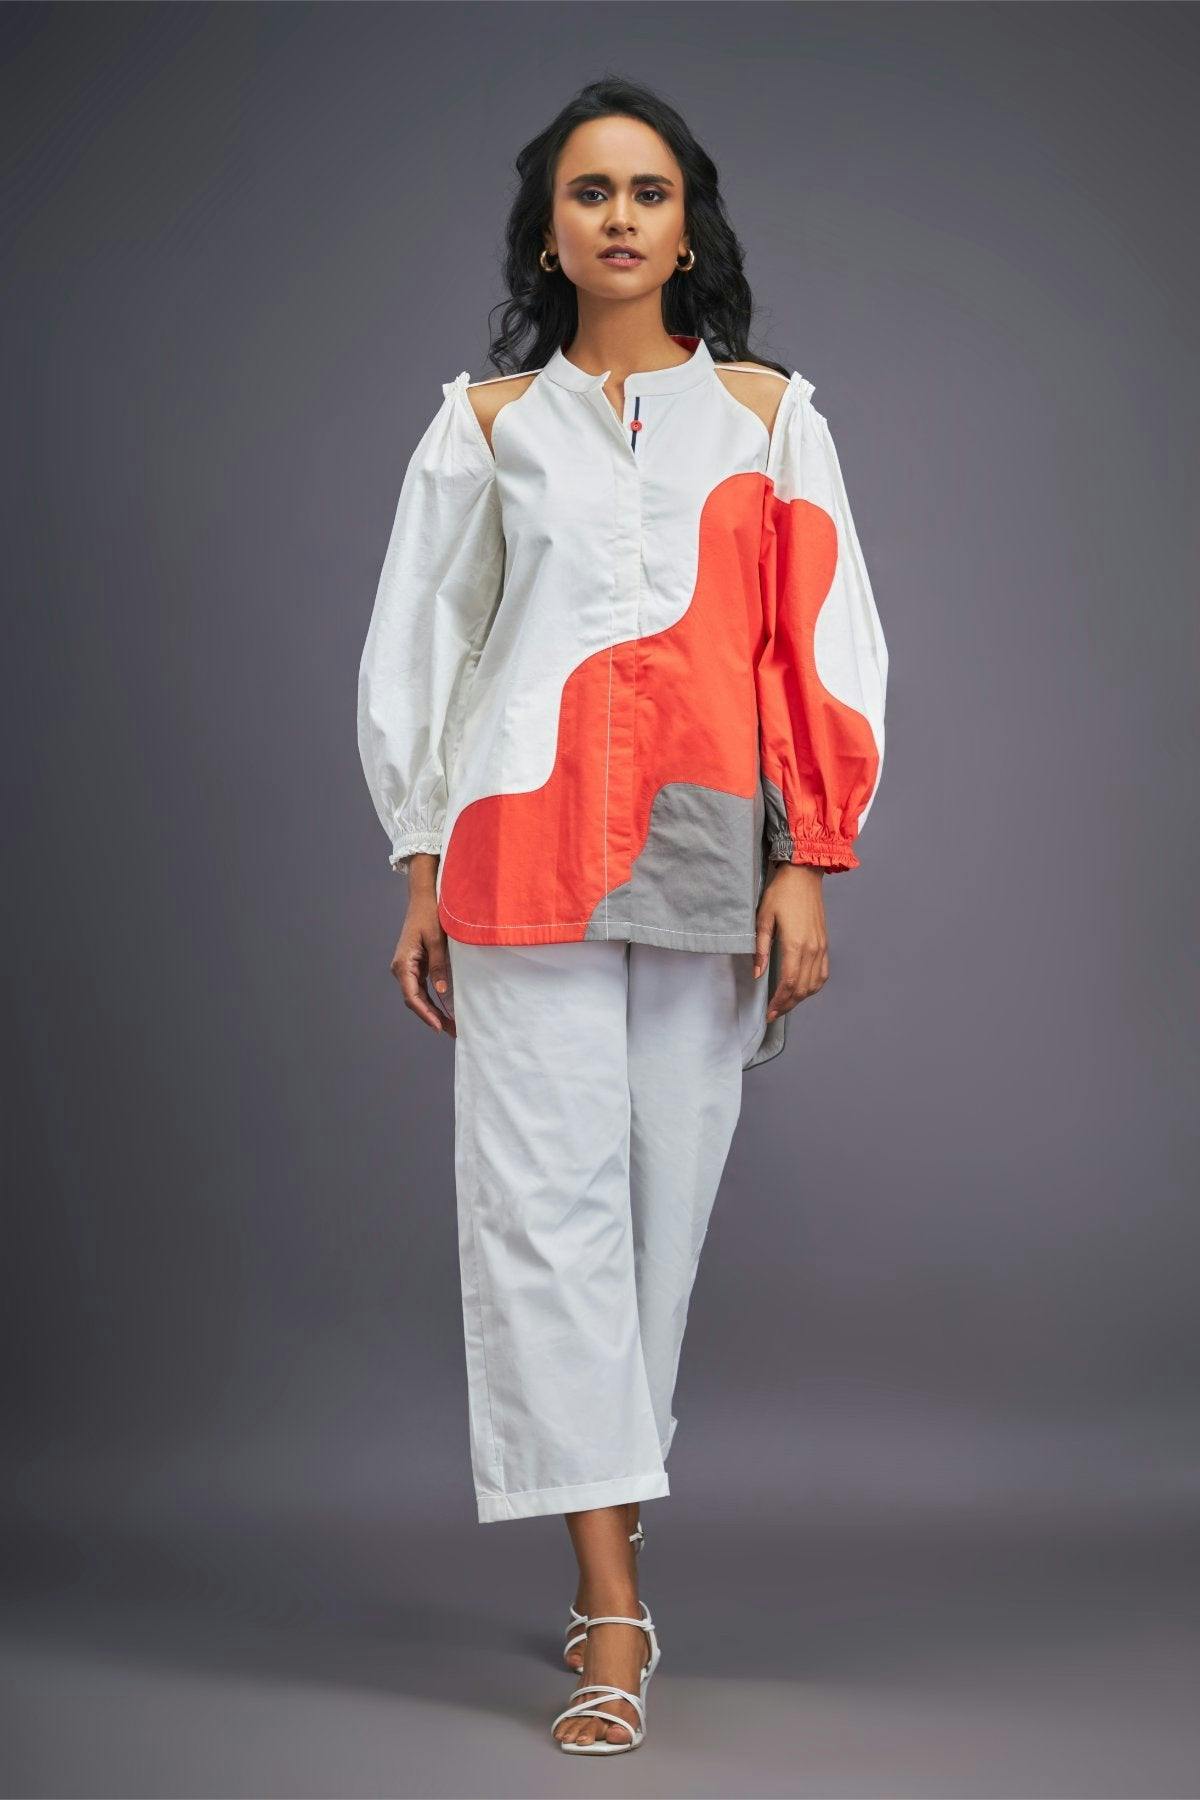 White Orange Shirt With Shoulder Cut Detail, a product by Deepika Arora